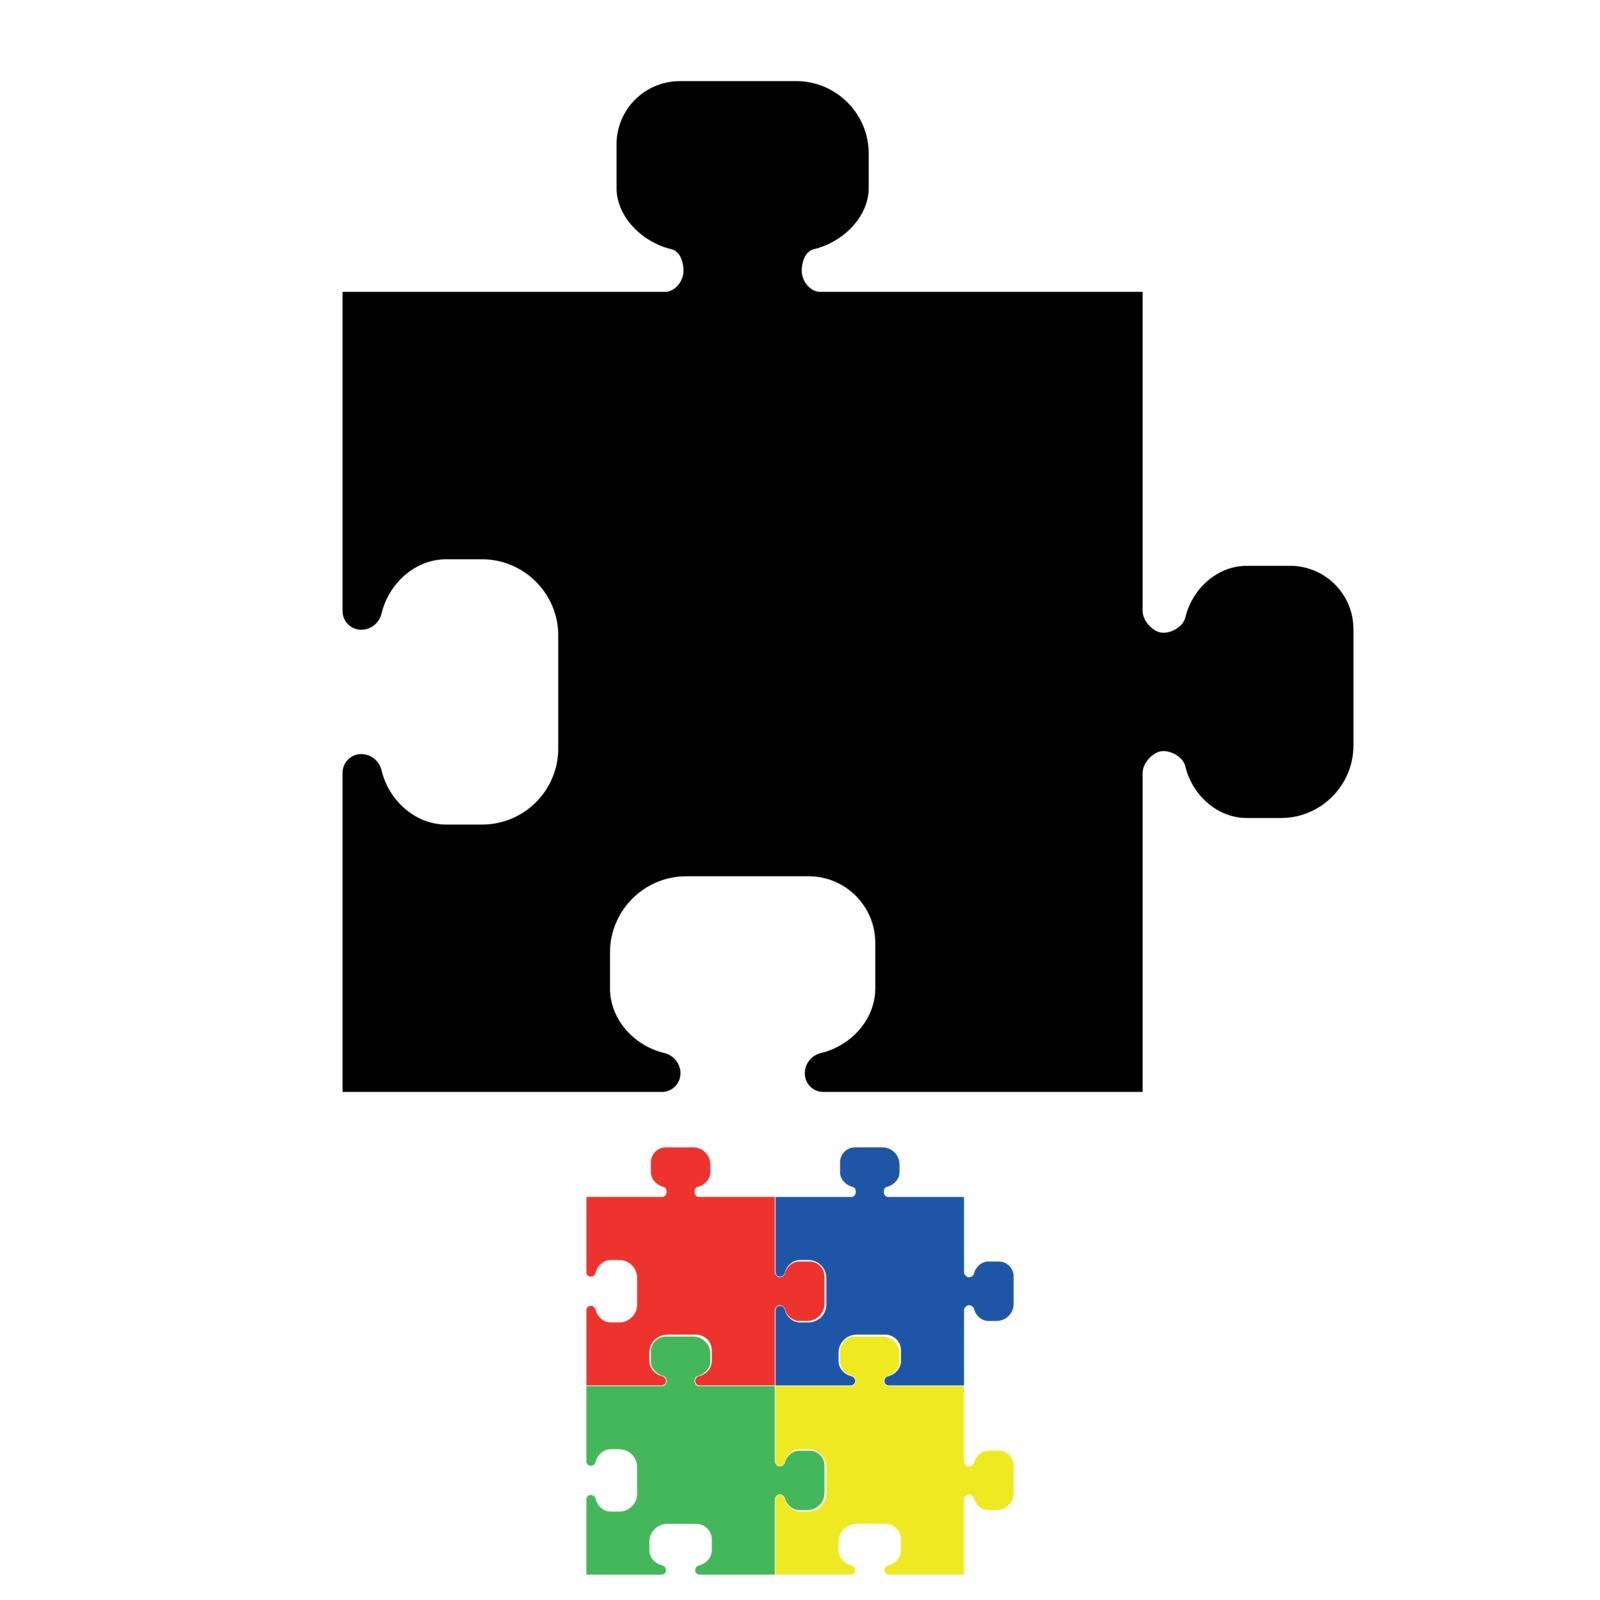 Black jigsaw or puzzle icon. by serhii435